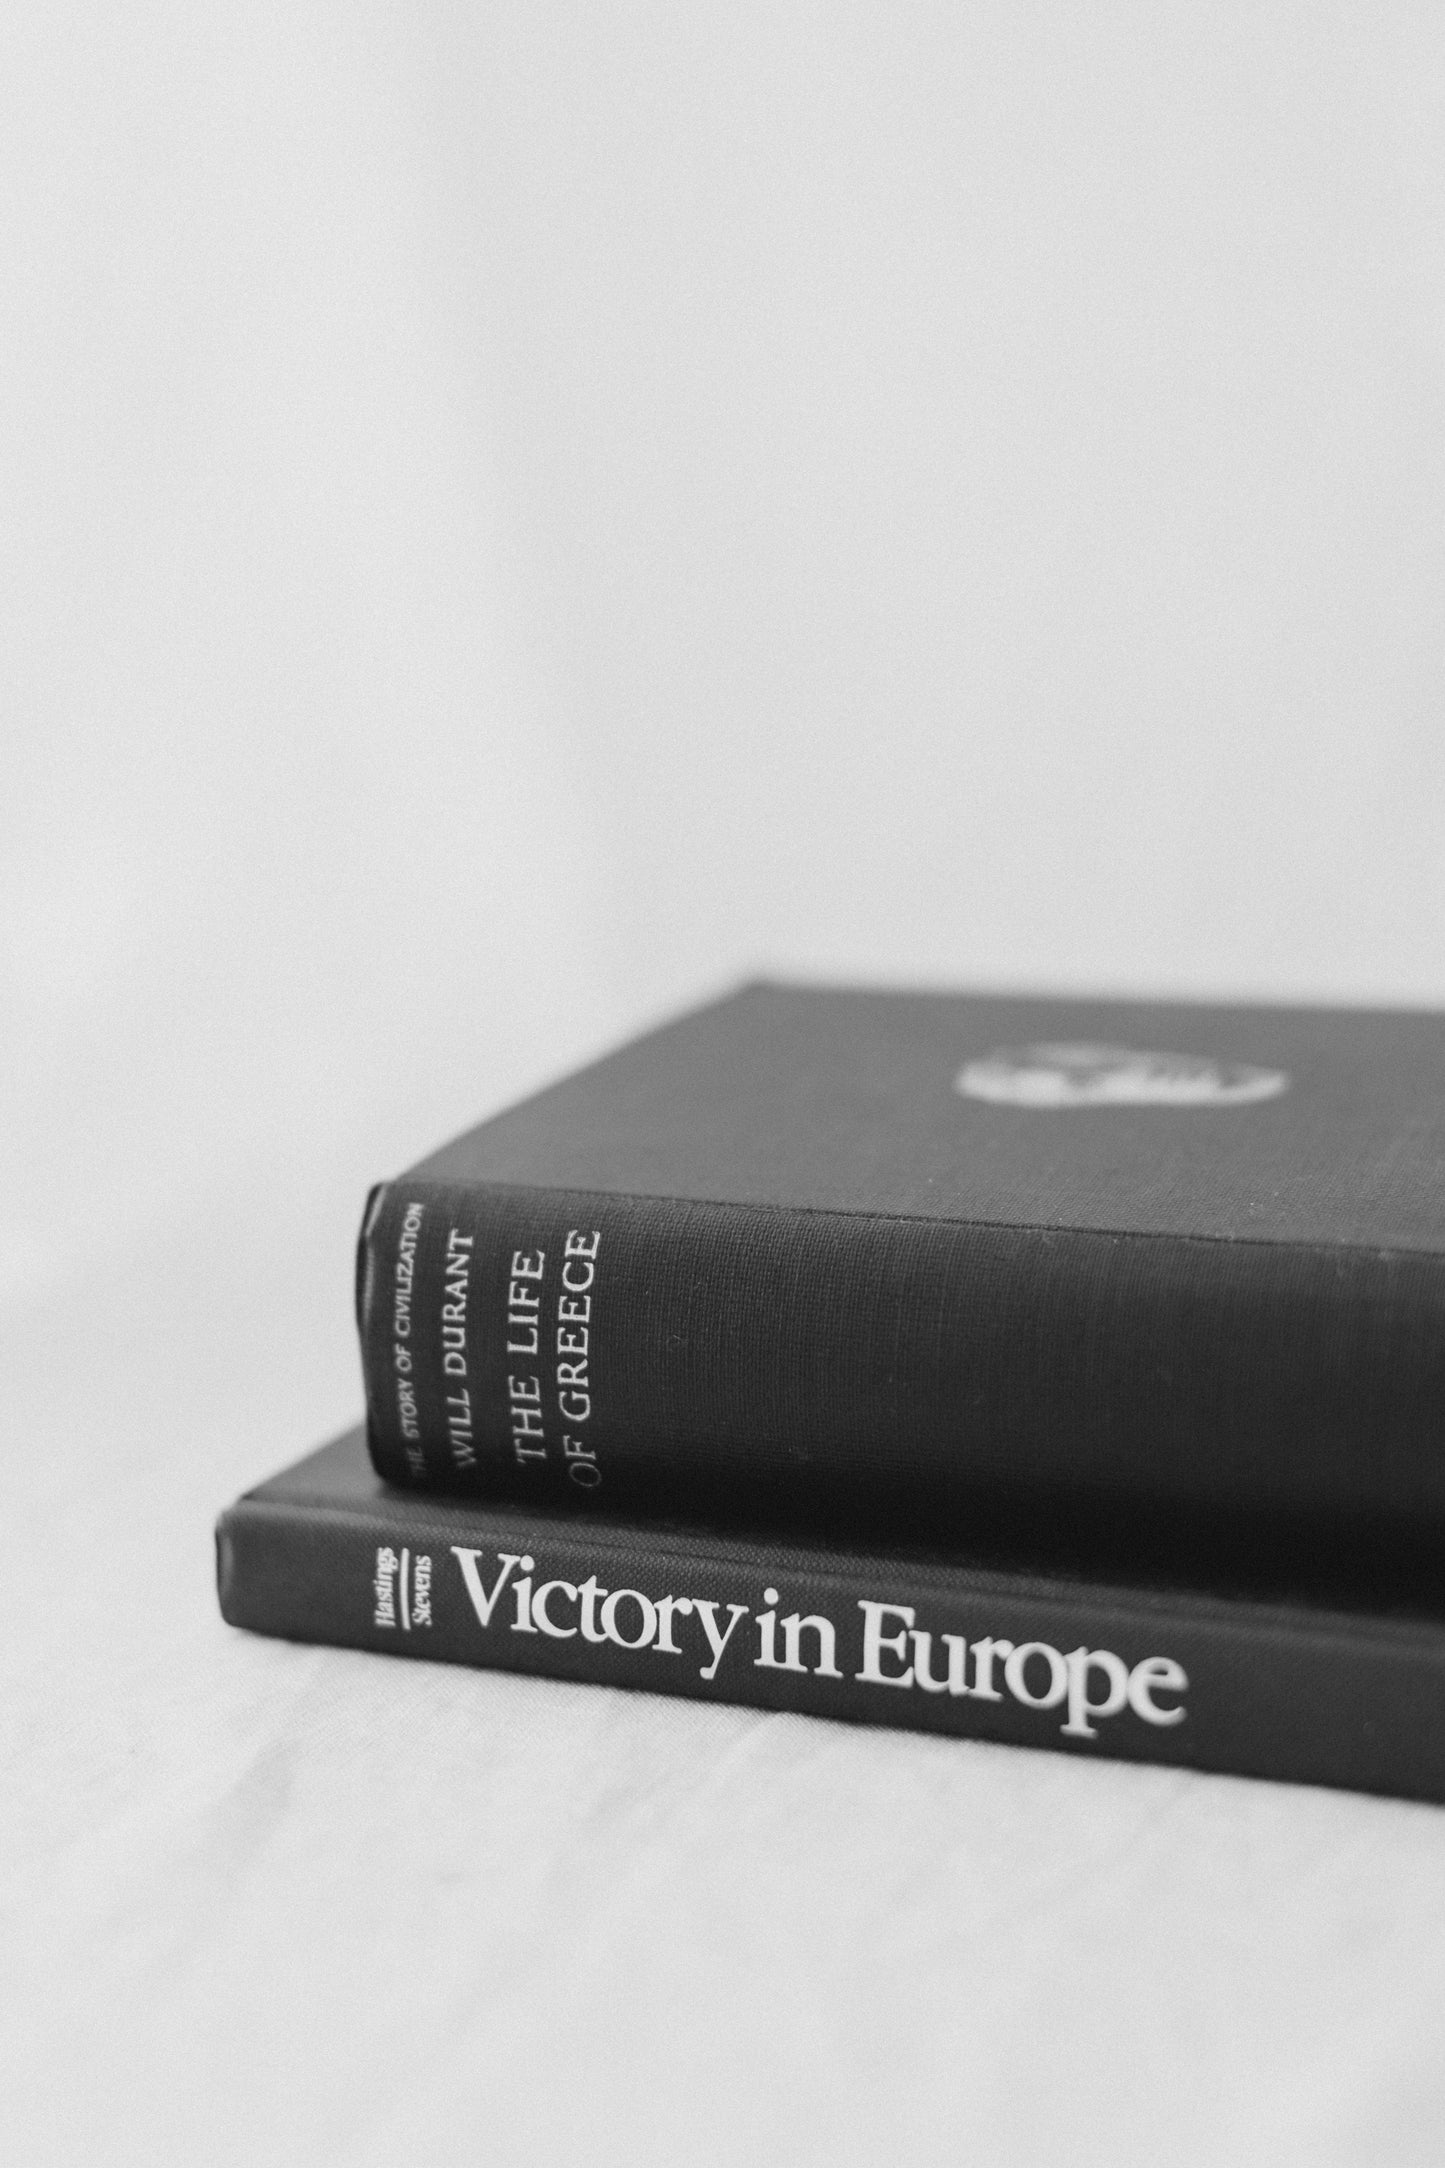 Found Victory in Europe + Life in Greece Book Stack